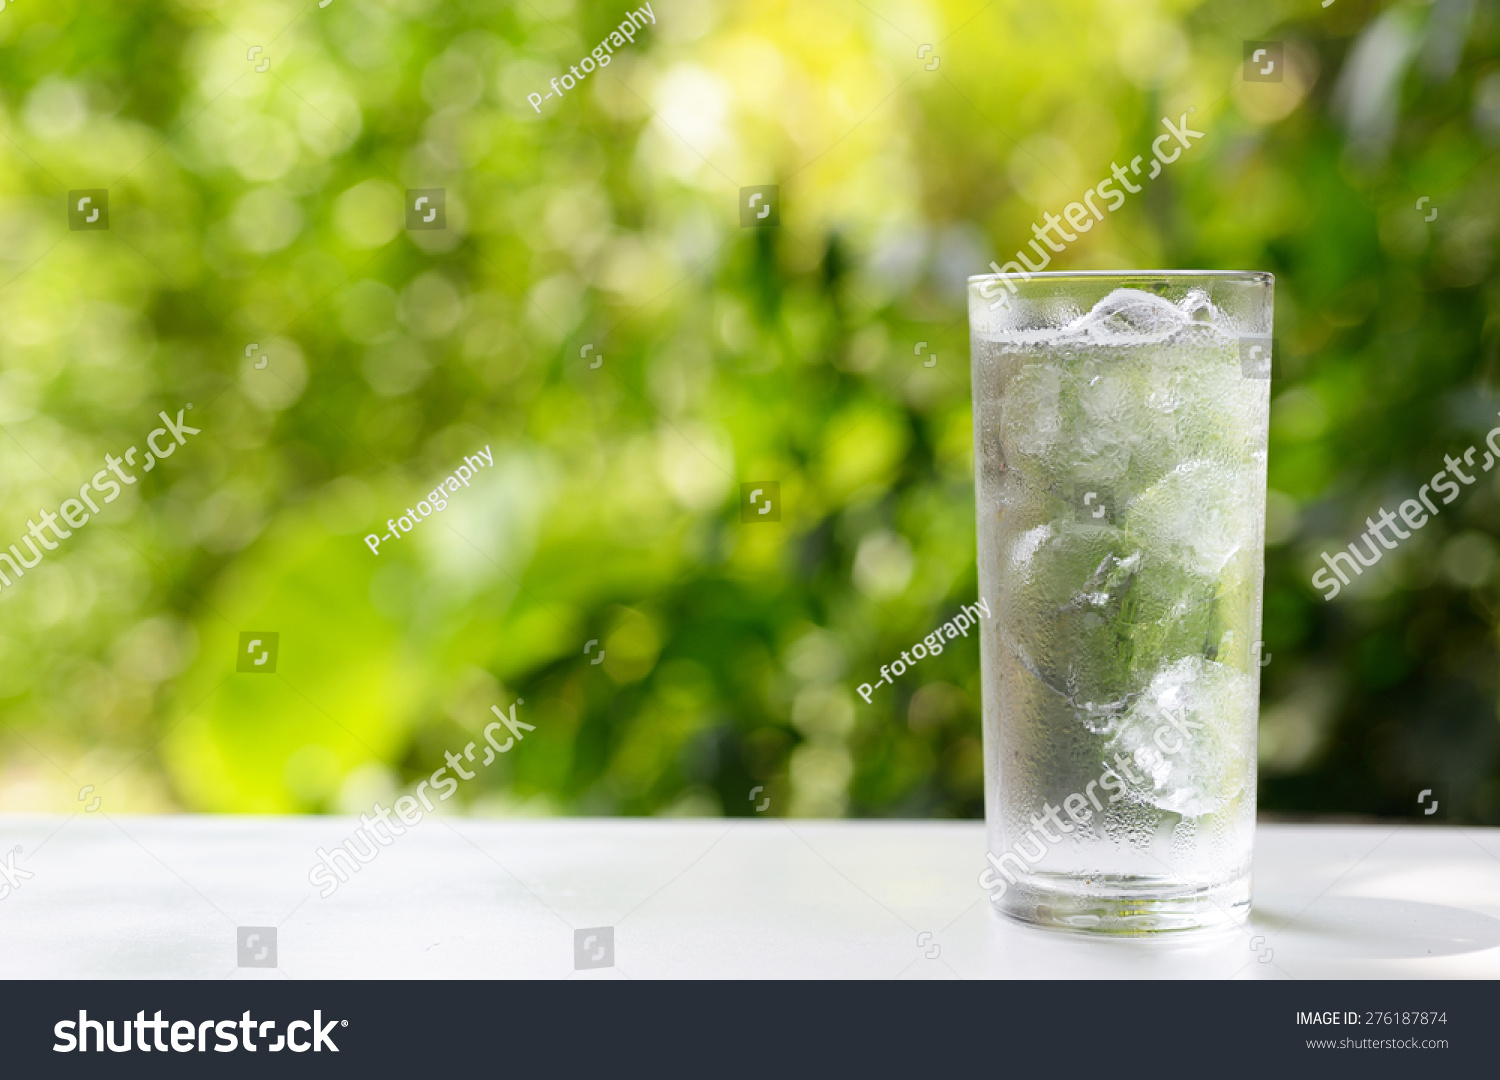 a glass of water with ice on nature background. #276187874